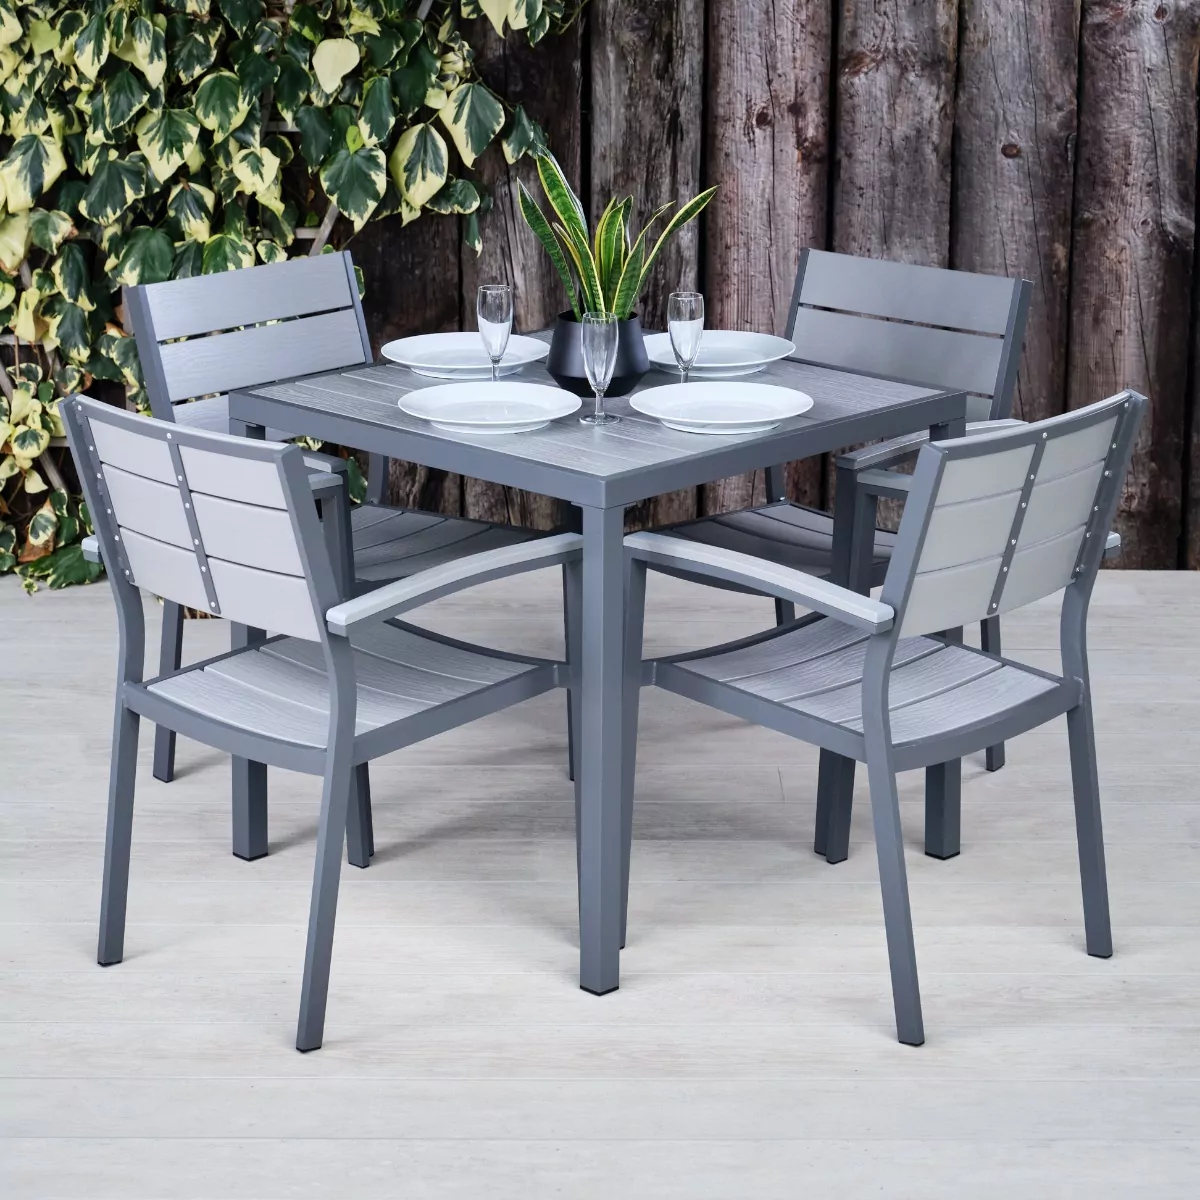 Plastic and Aluminium Grey Outdoor Square Table & Chairs - Mortimer Range